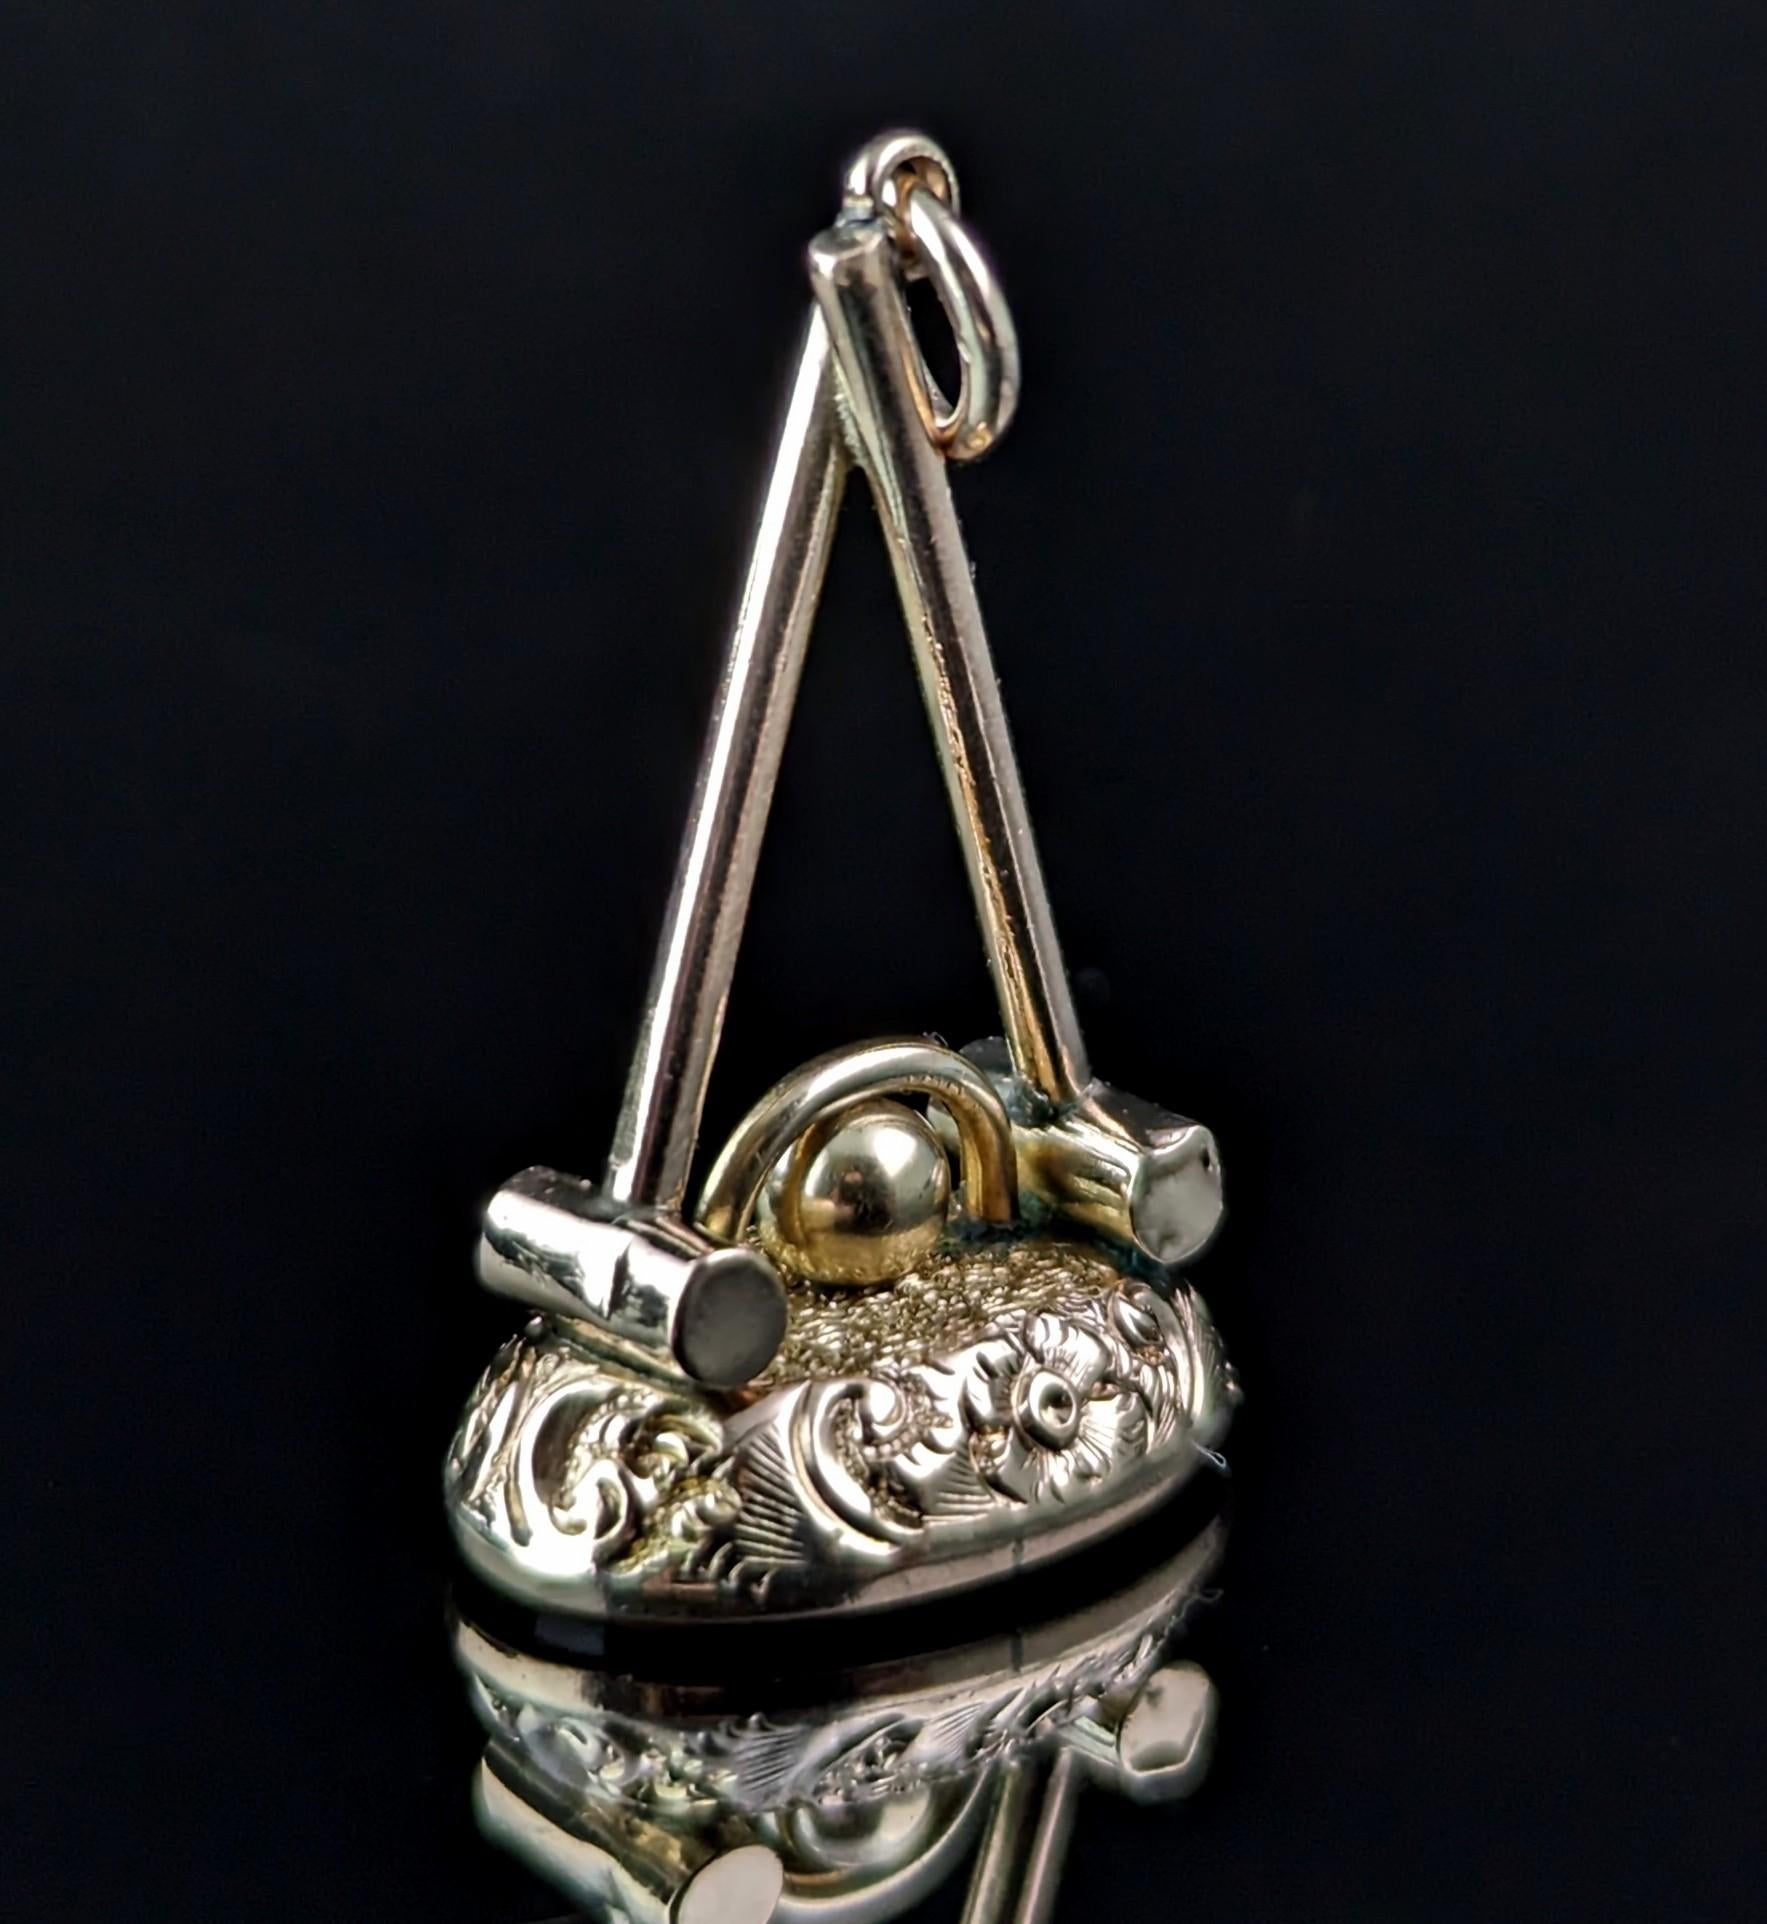 This antique 9ct gold seal fob is designed a little differently and is really very charming!

It is designed as two crossed croquet mallets with a hoop and ball to the base, resting on top of the chased gold which houses a lovely rich red oval